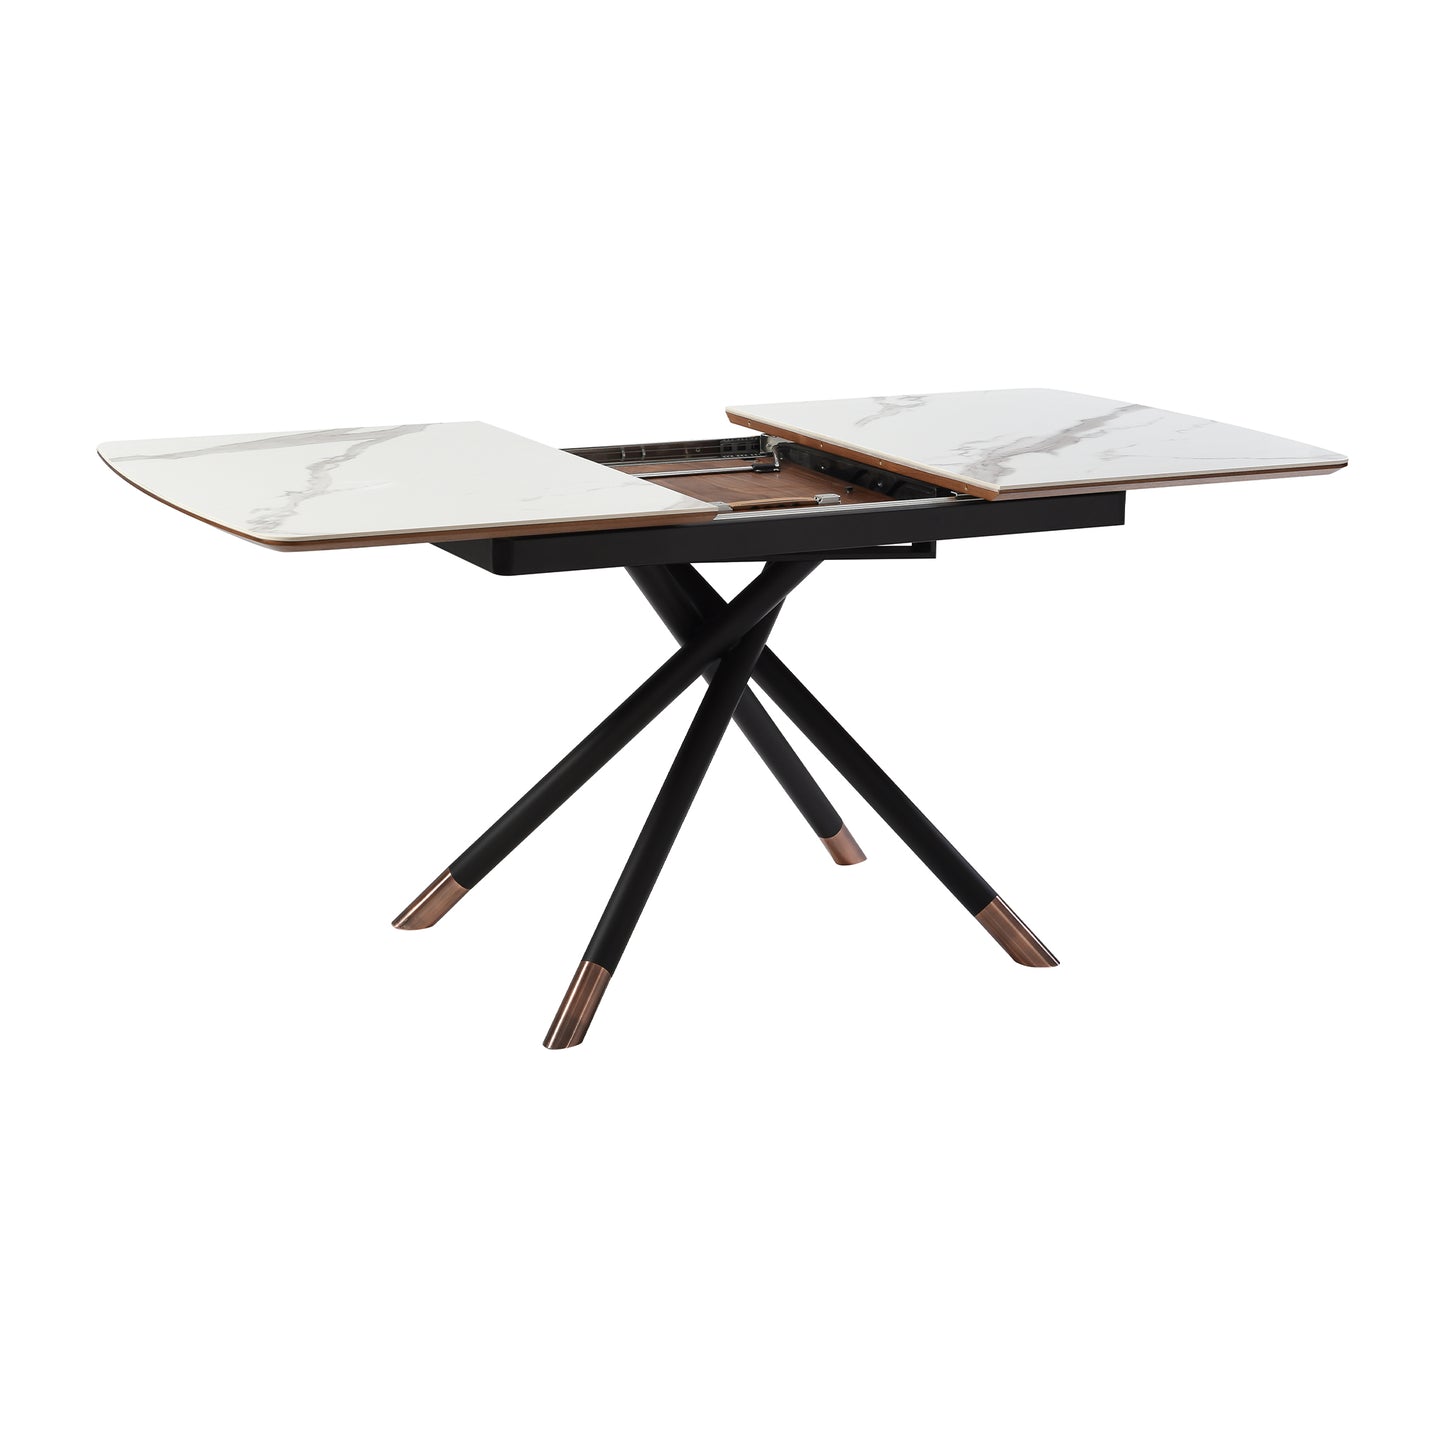 Alora Extendable Dining Table with Light Gray Ceramic and Wood Top and Metal Legs